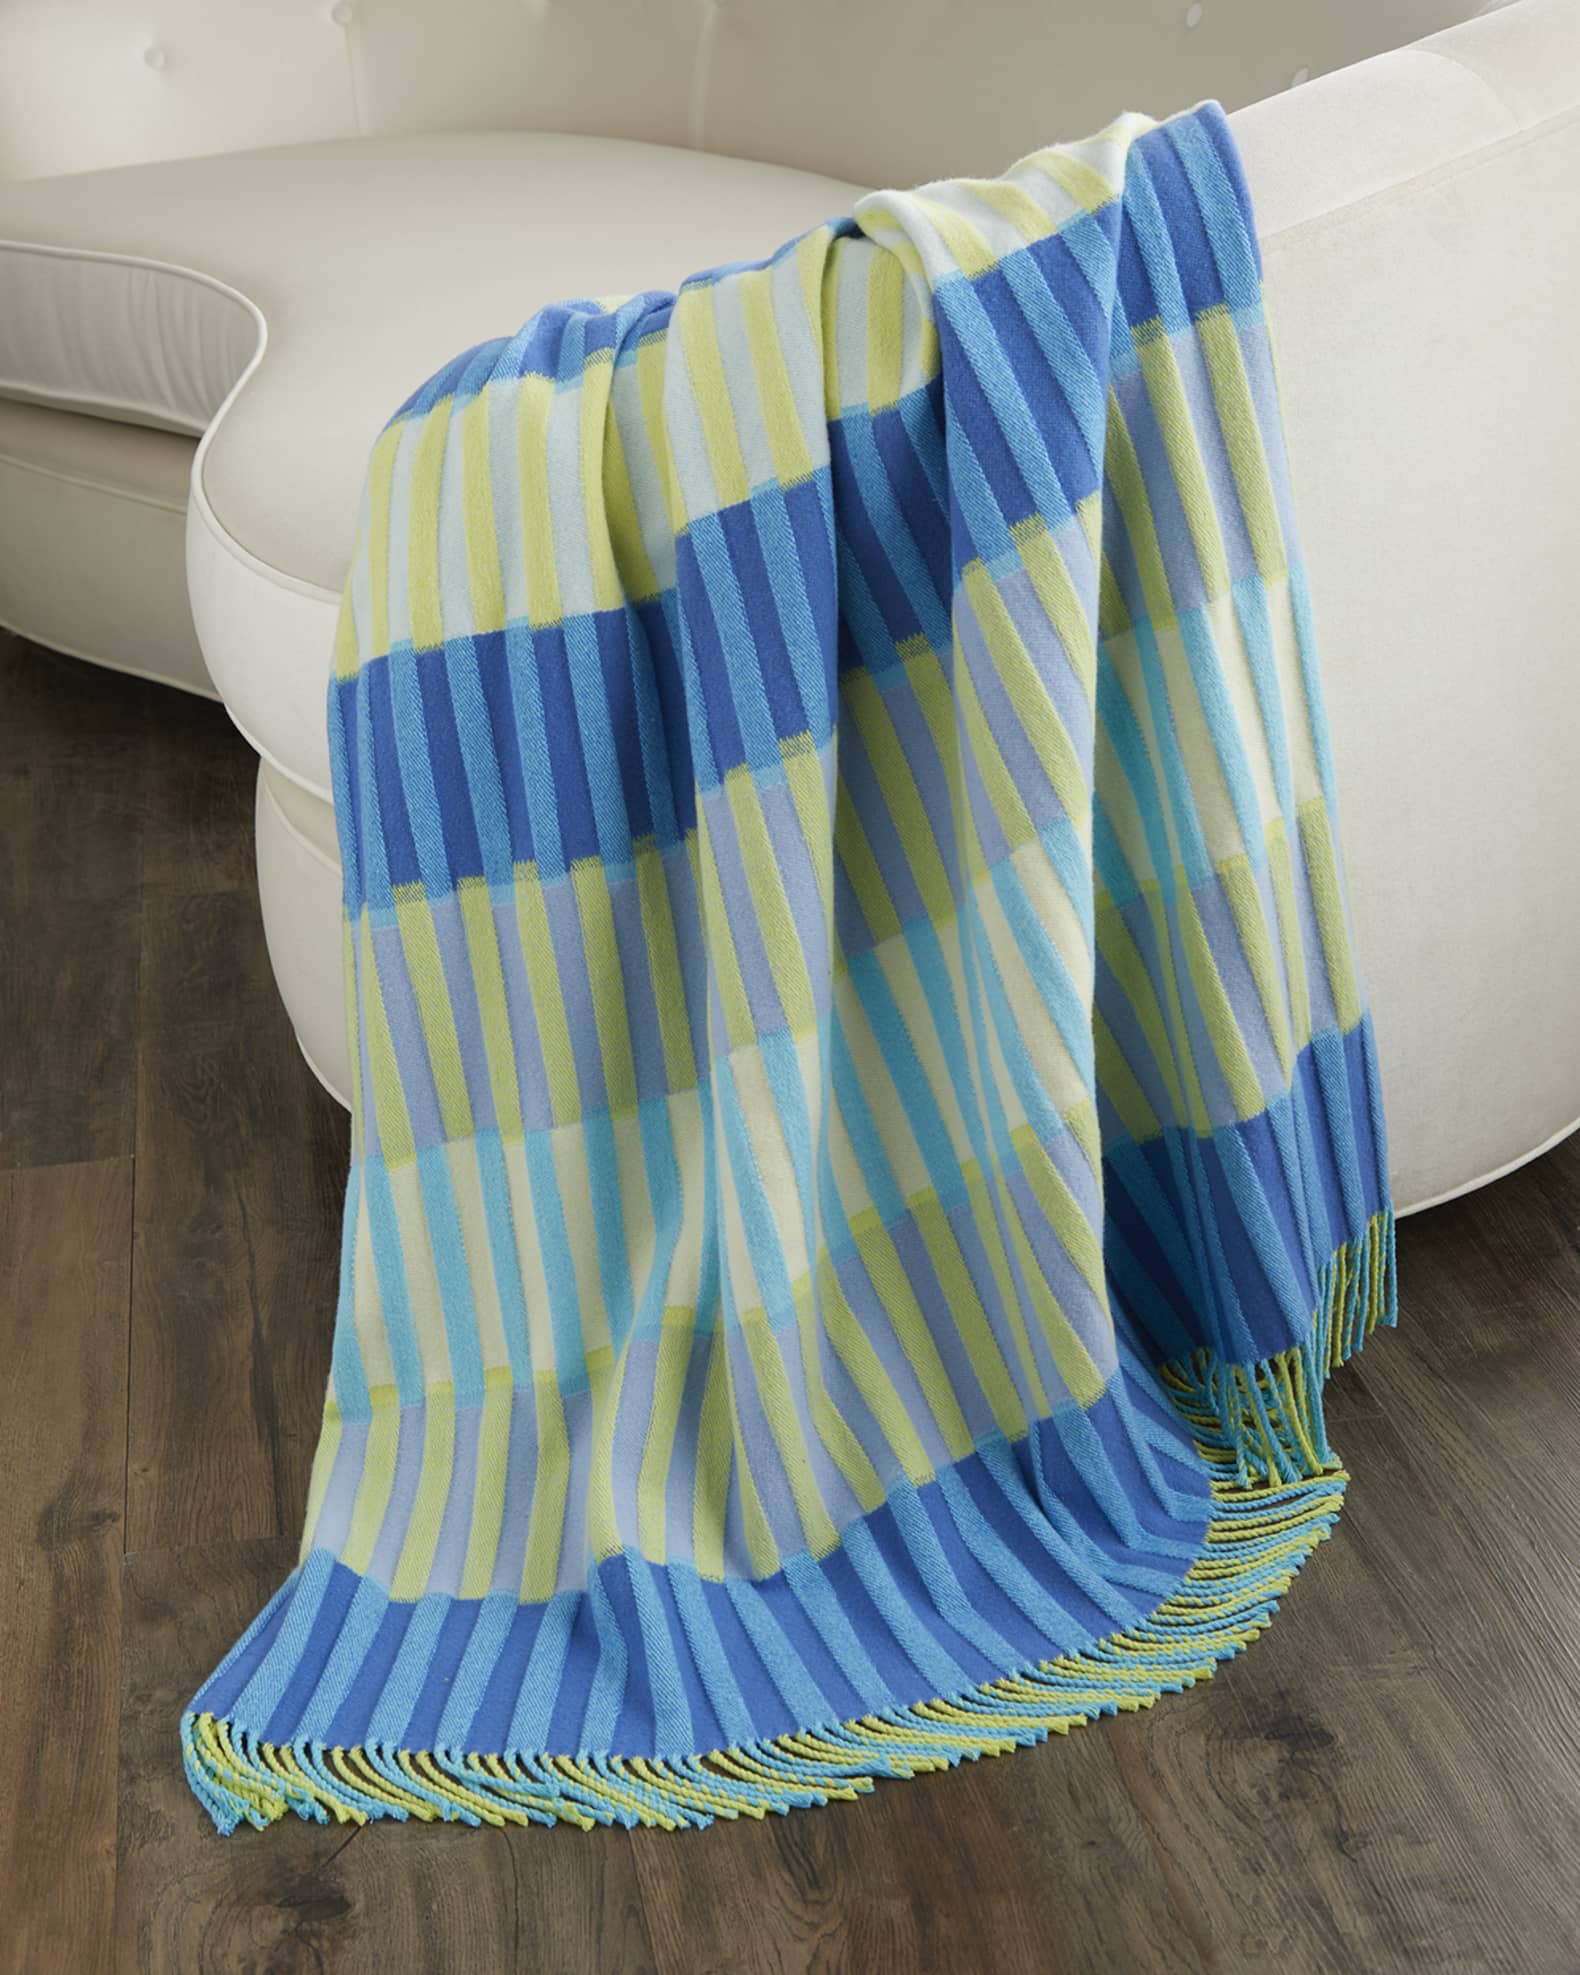 Murazzi Porcelain Throw Blanket by Horchow